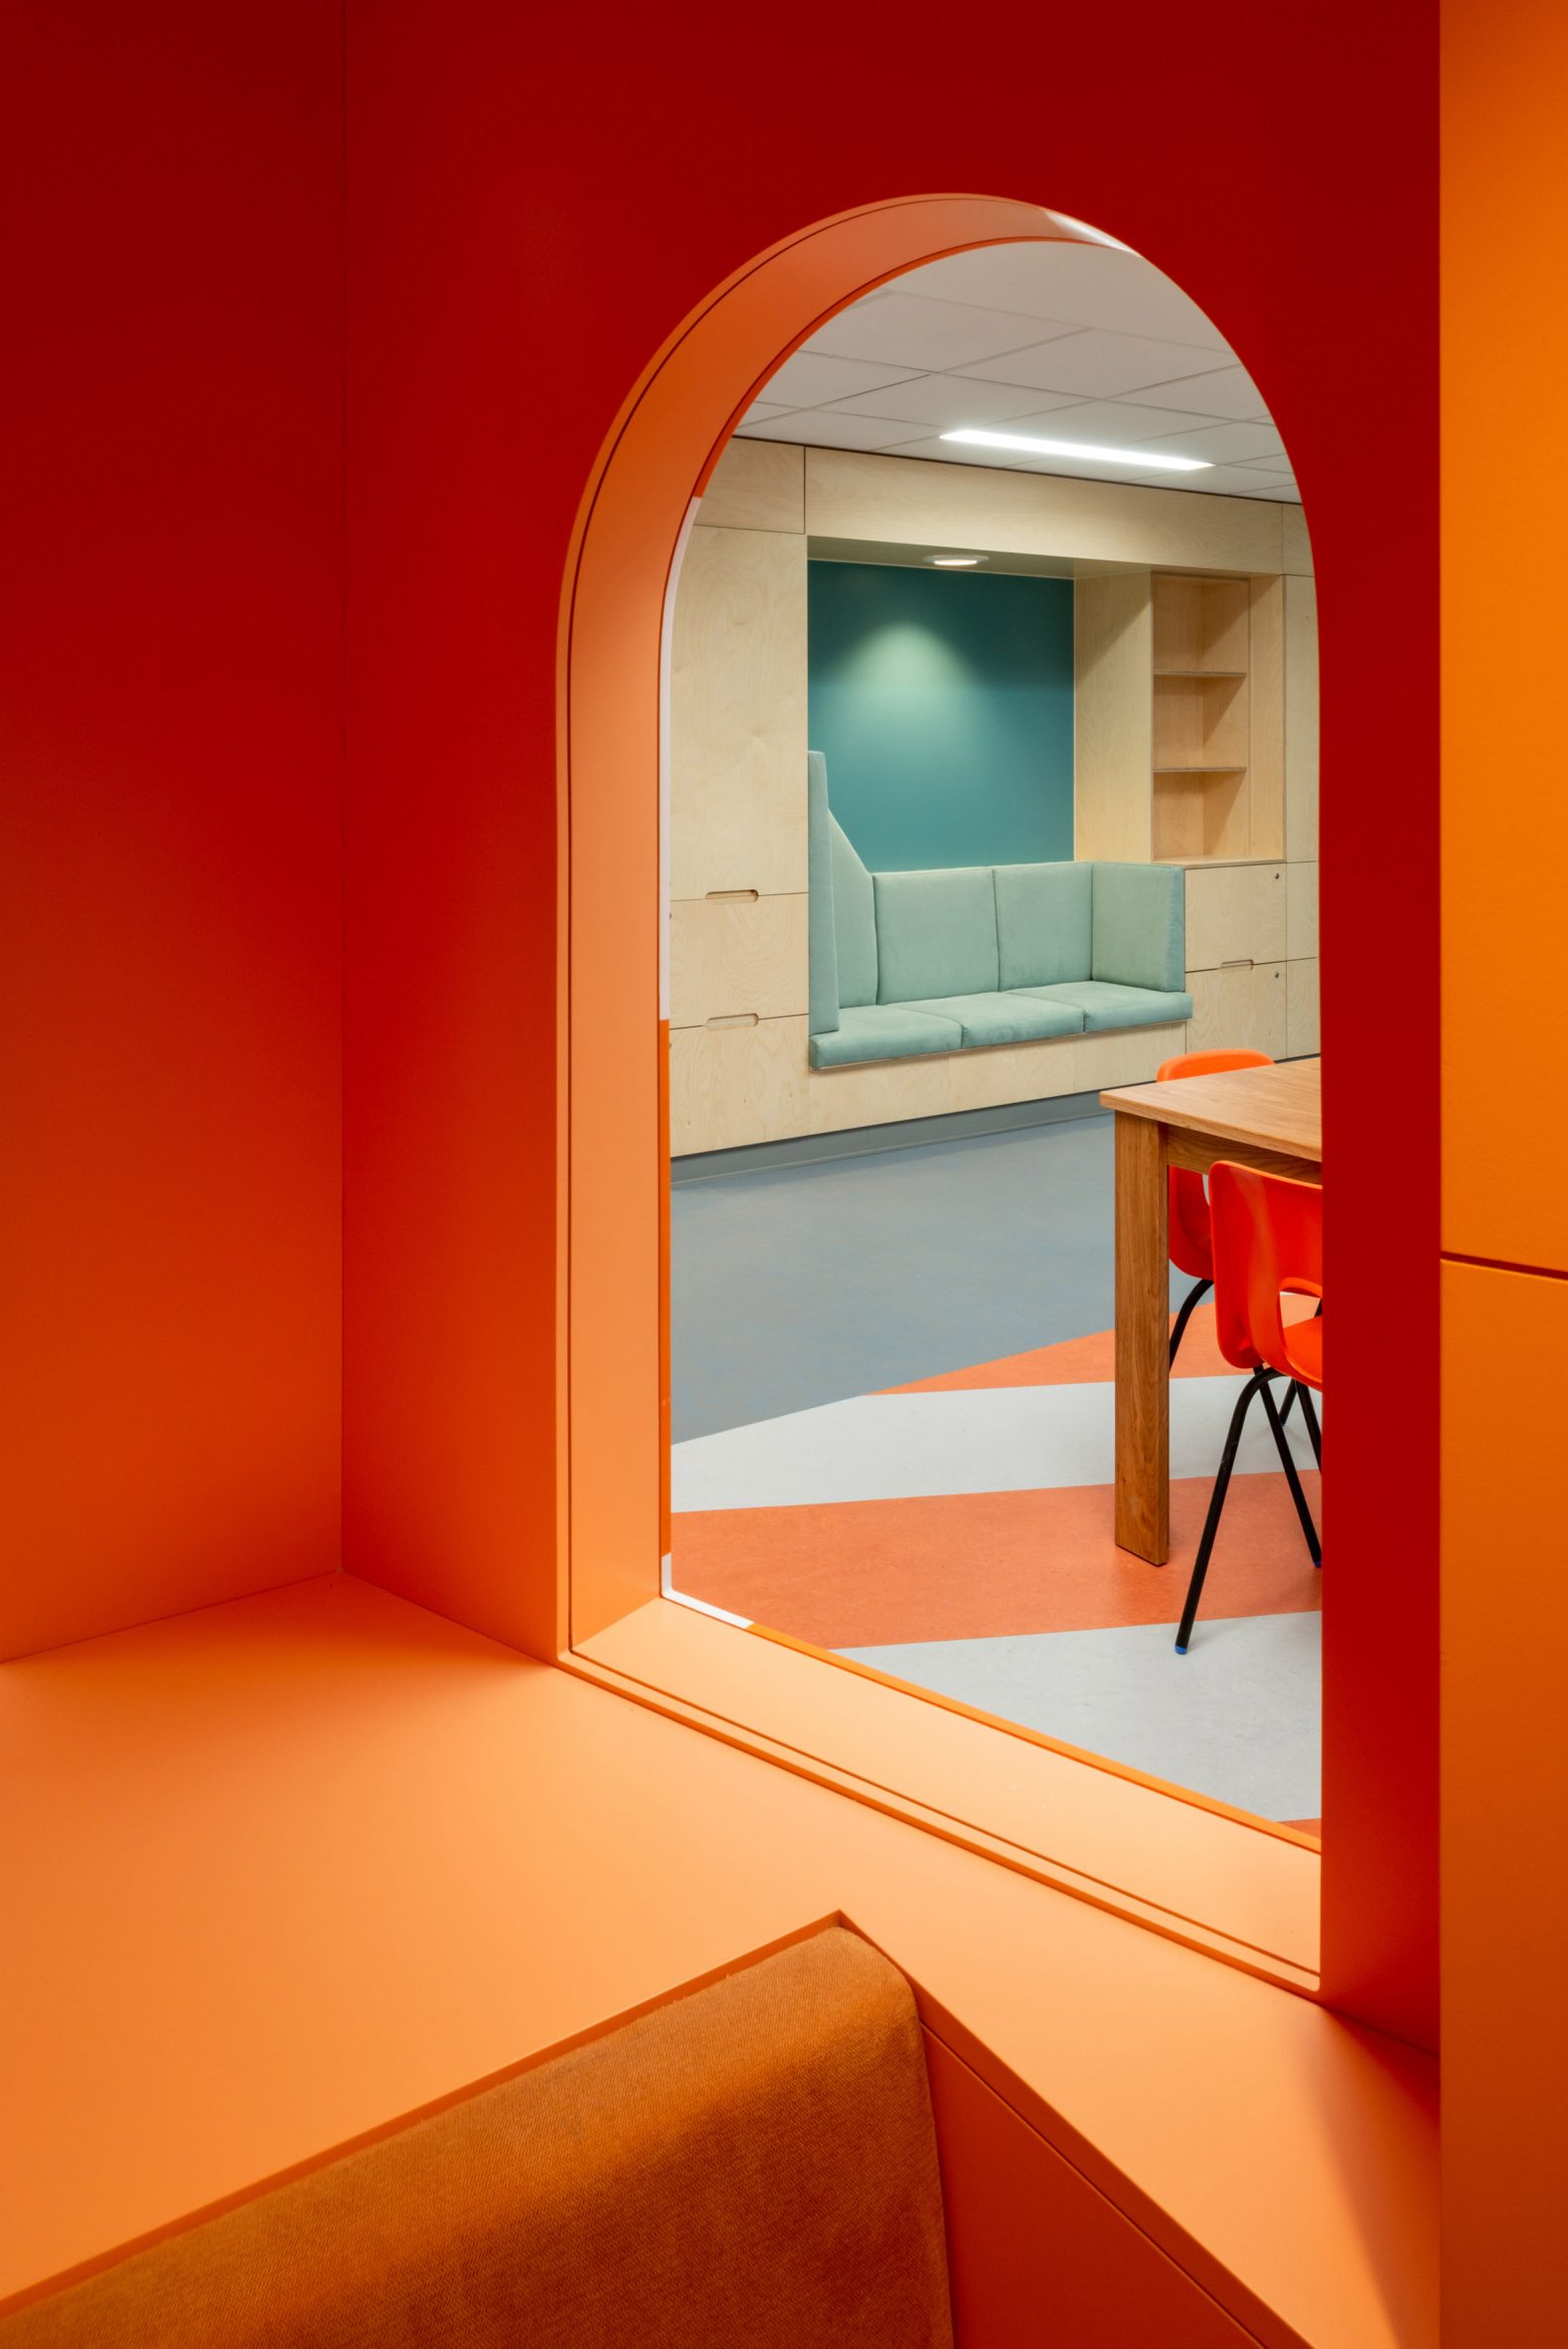 Orange lighthouse interior at CAMHS Edinburgh mental health unit by Projects Office